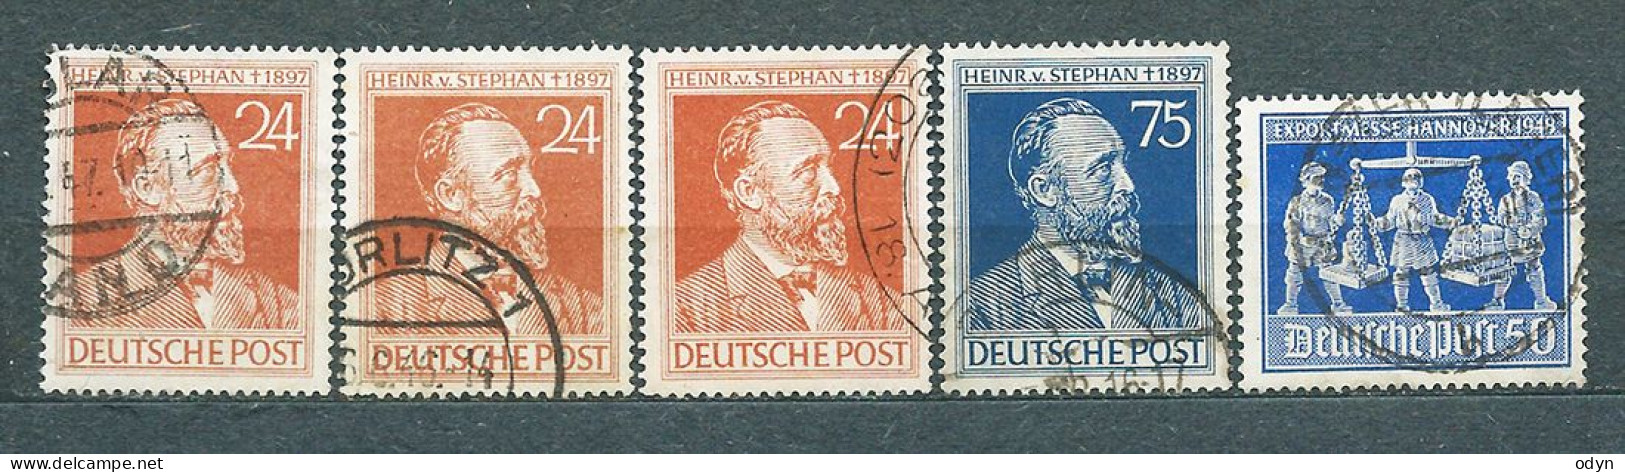 Germany, Allied Occup., 1947/48, lot of 102 stamps MiNr 957 + 960 + 963-64 + 970 - used